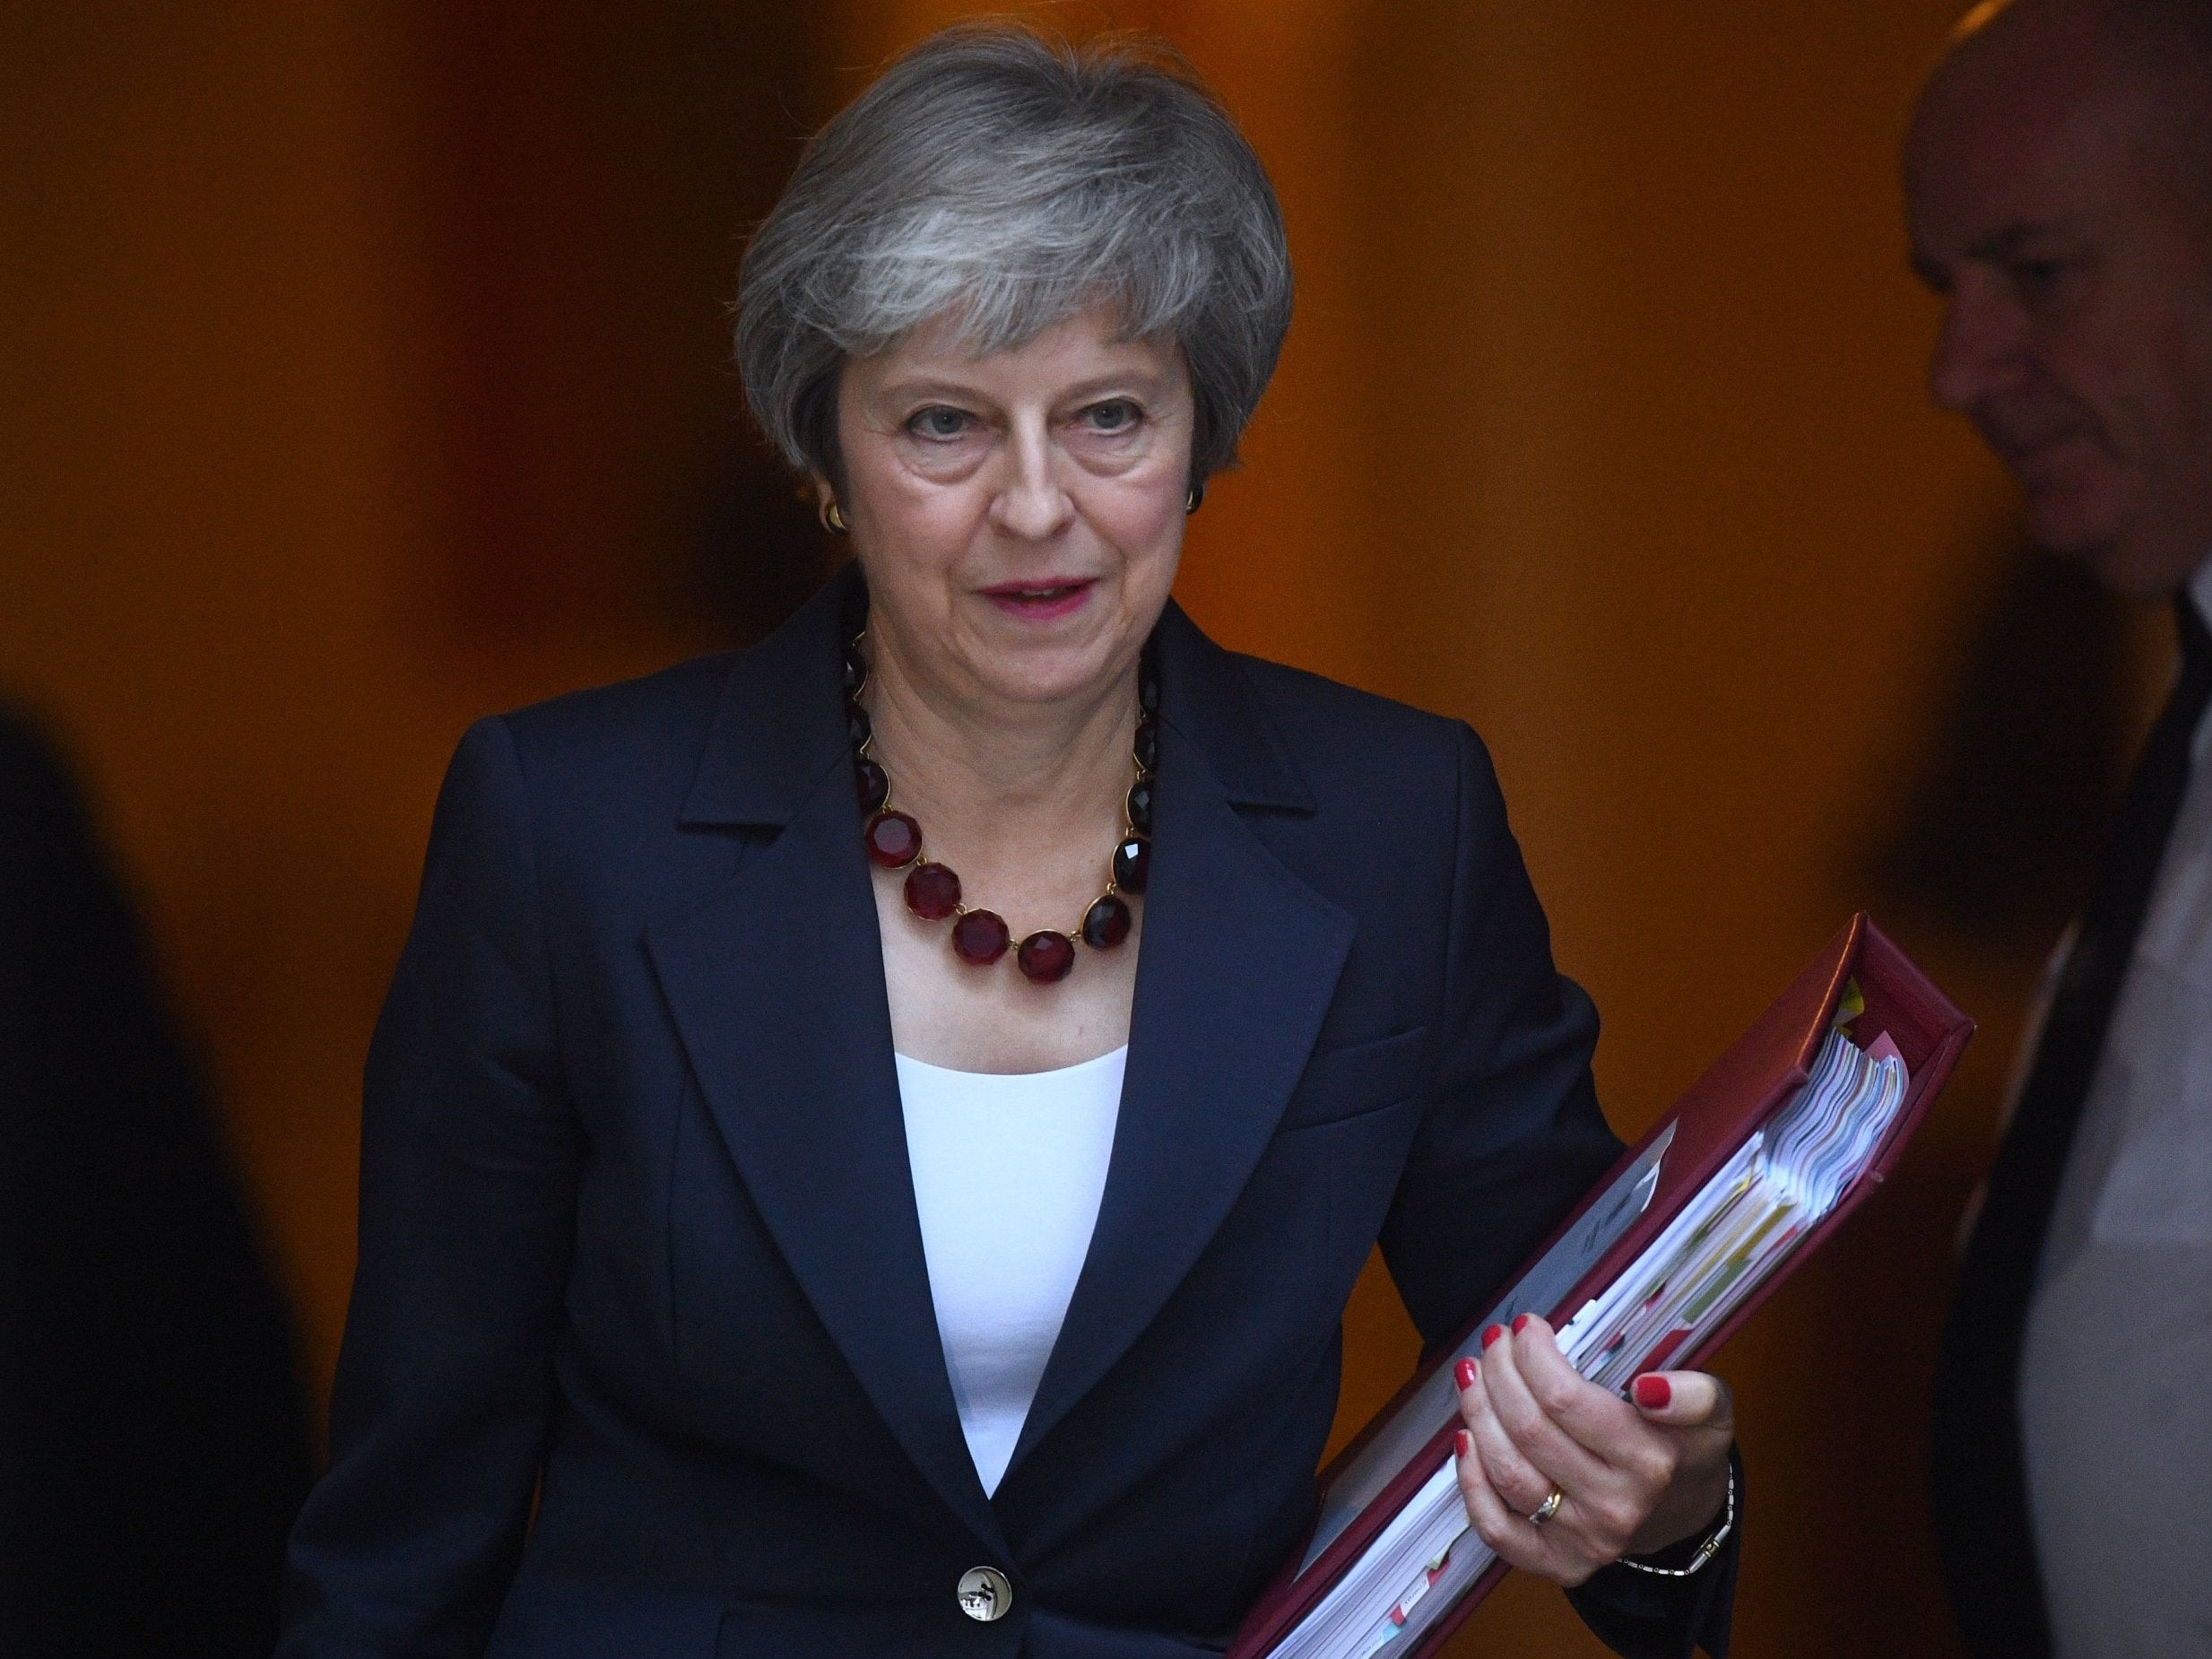 The parliamentary arithmetic is perilous for May